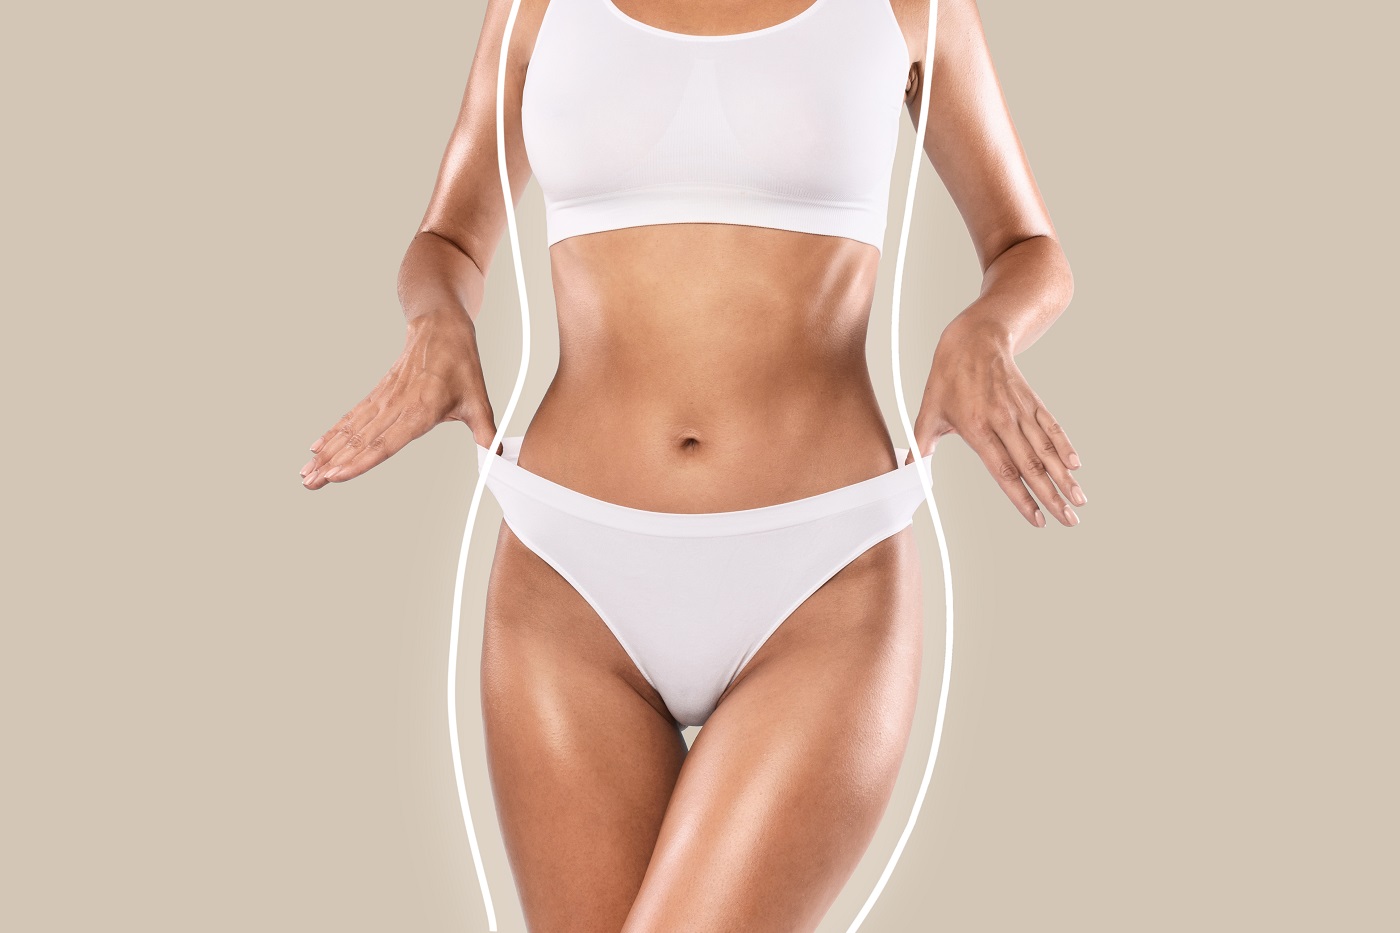 Body,shaping,spa,and slimming